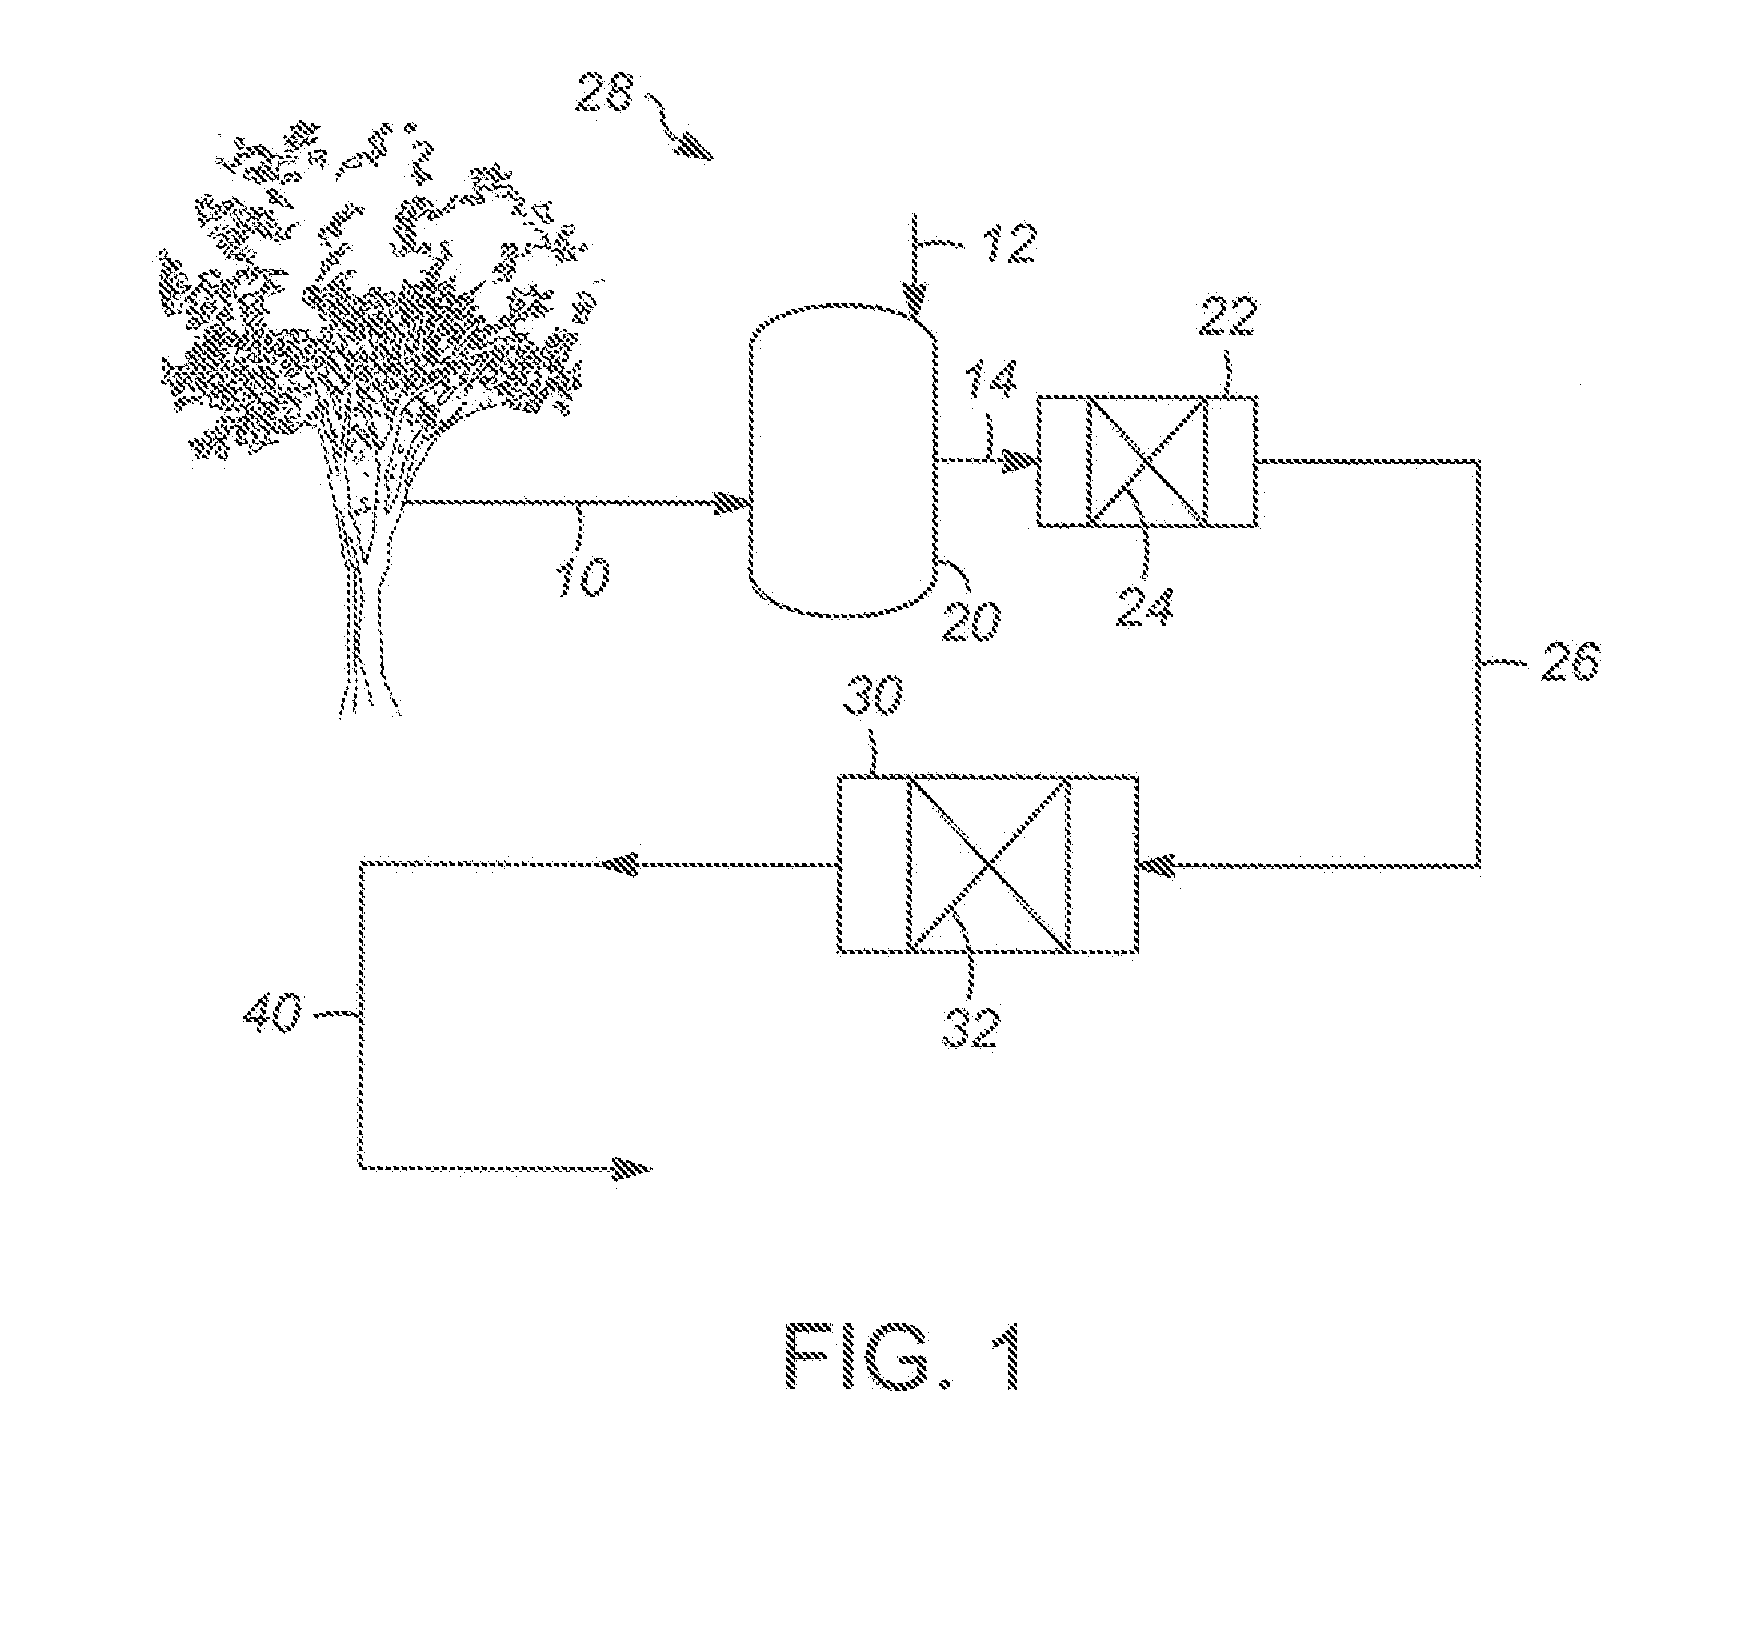 Methods and apparatuses for producing xylene from propylbenzene